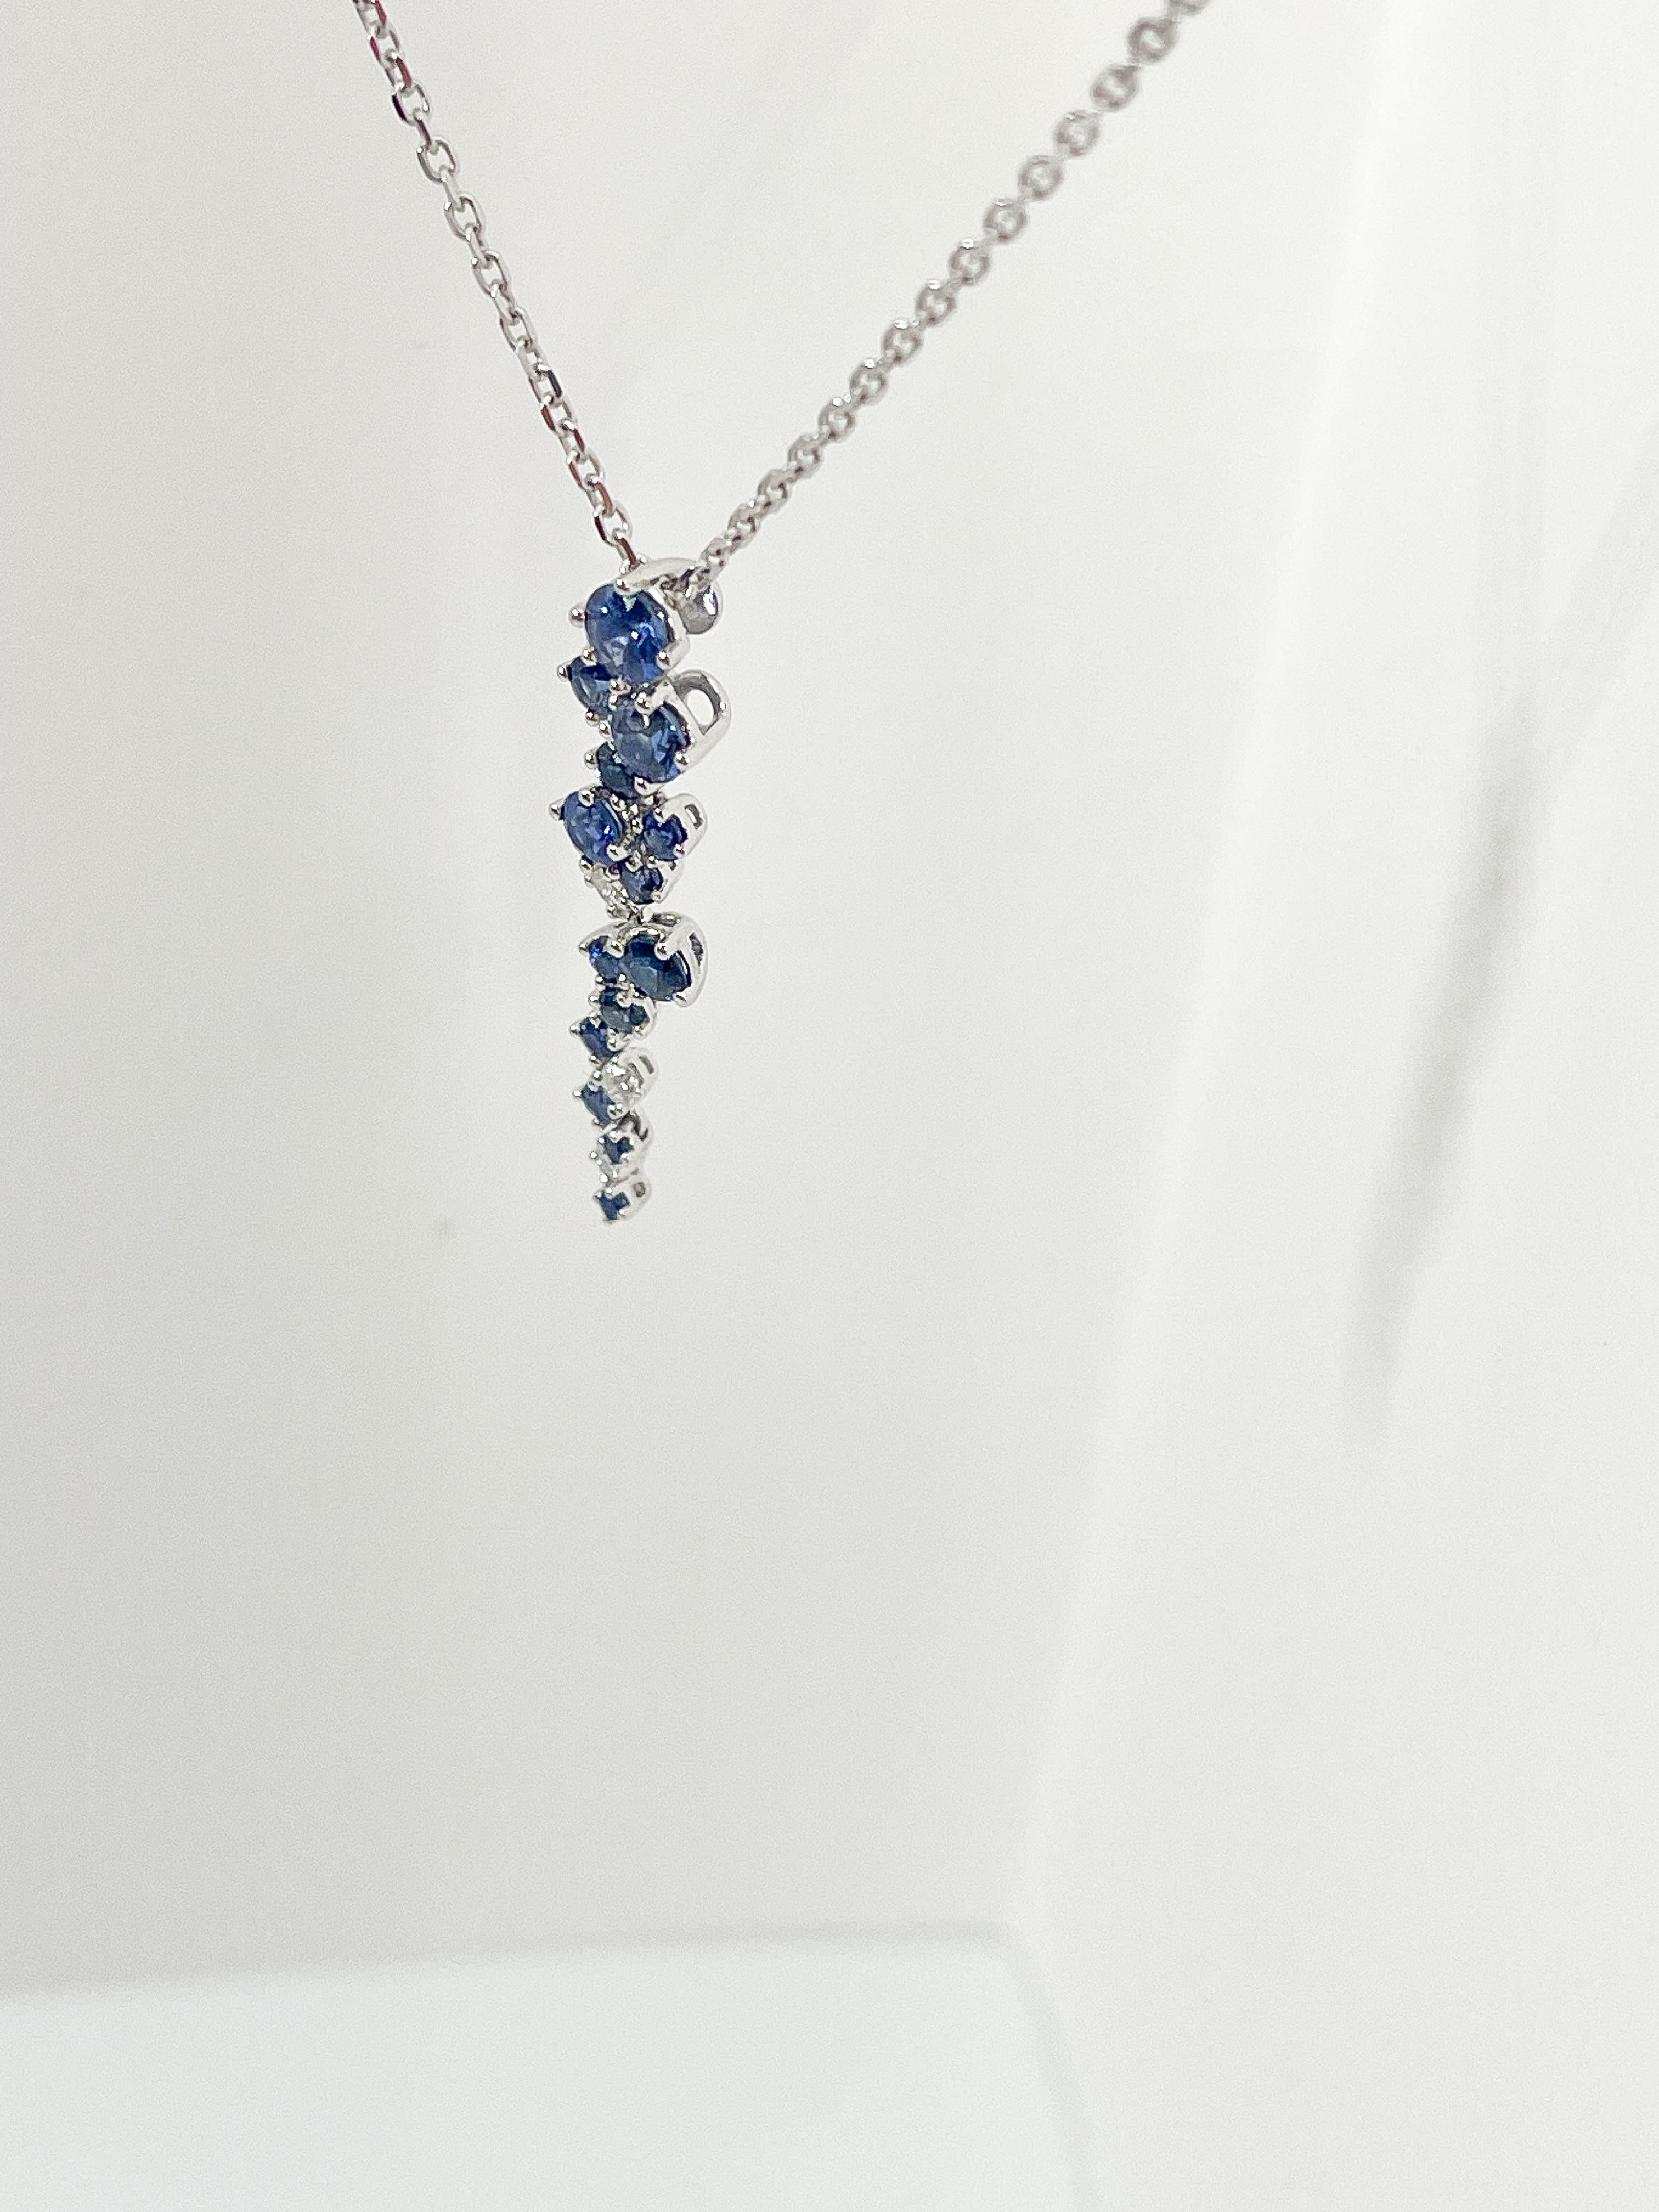 18K White Gold 1.11 CTW Sapphire and Diamond Pendant Necklace  In Excellent Condition For Sale In Stuart, FL